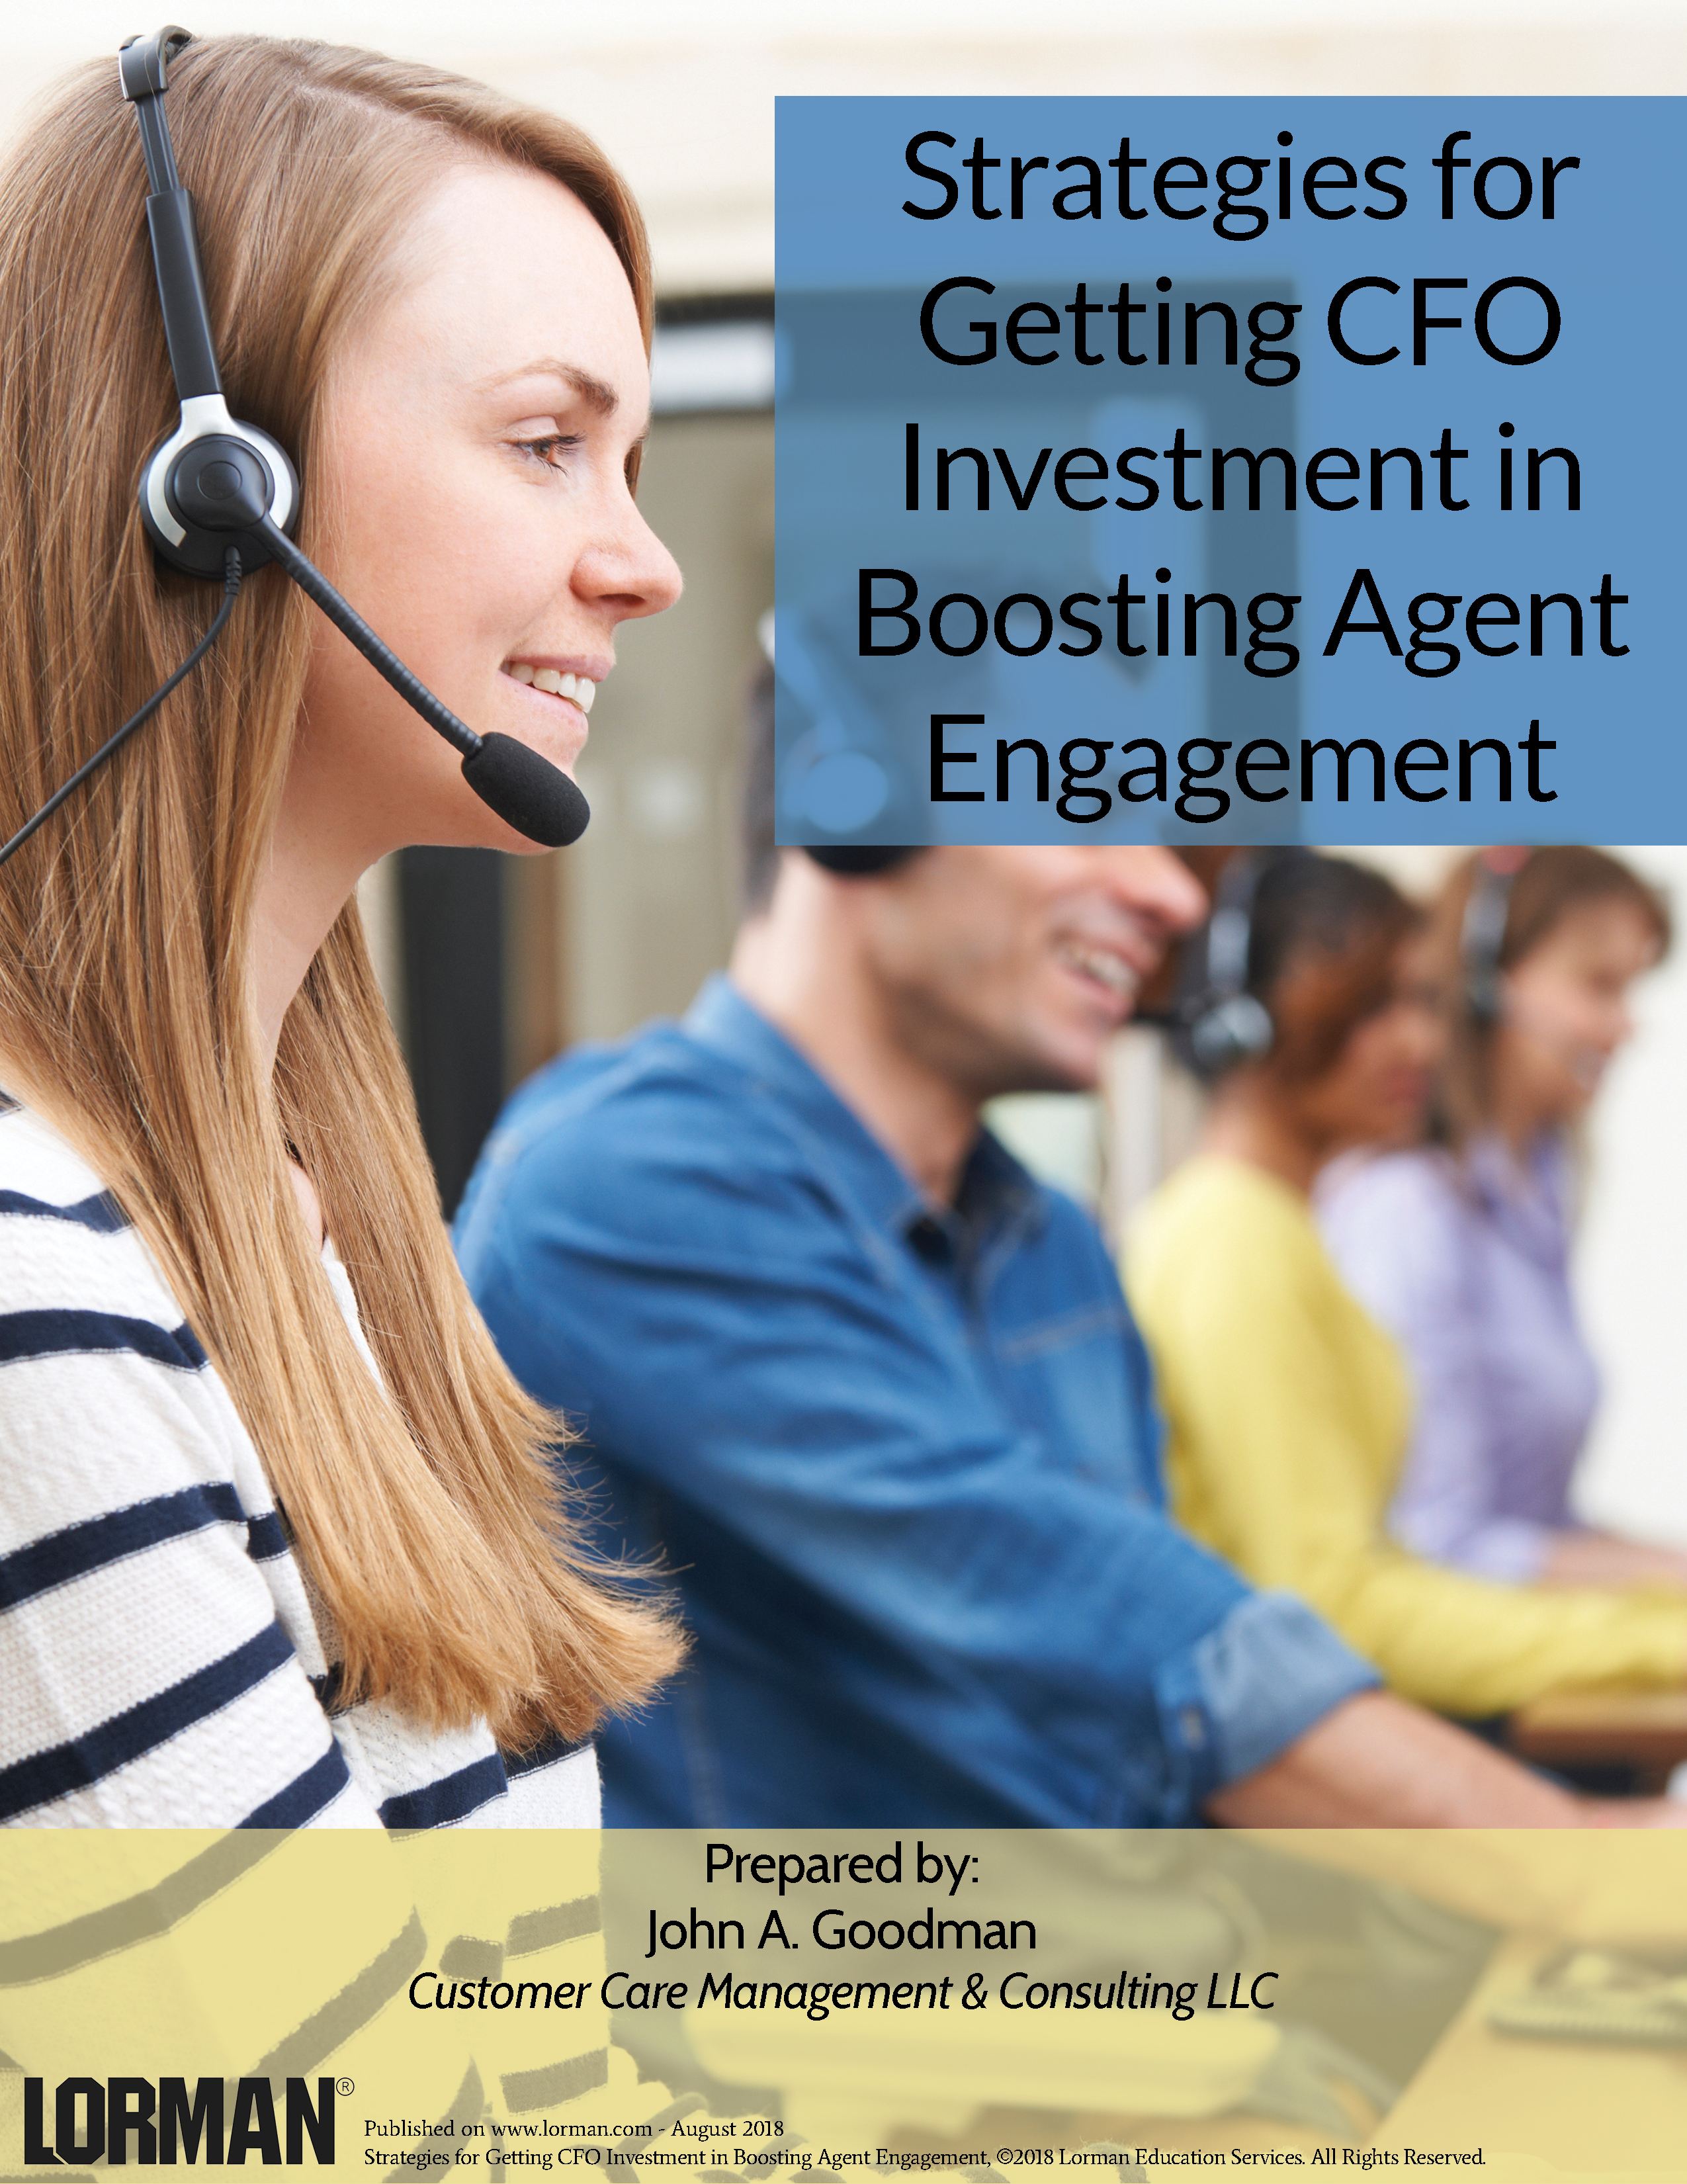 Strategies for Getting CFO Investment in Boosting Agent Engagement